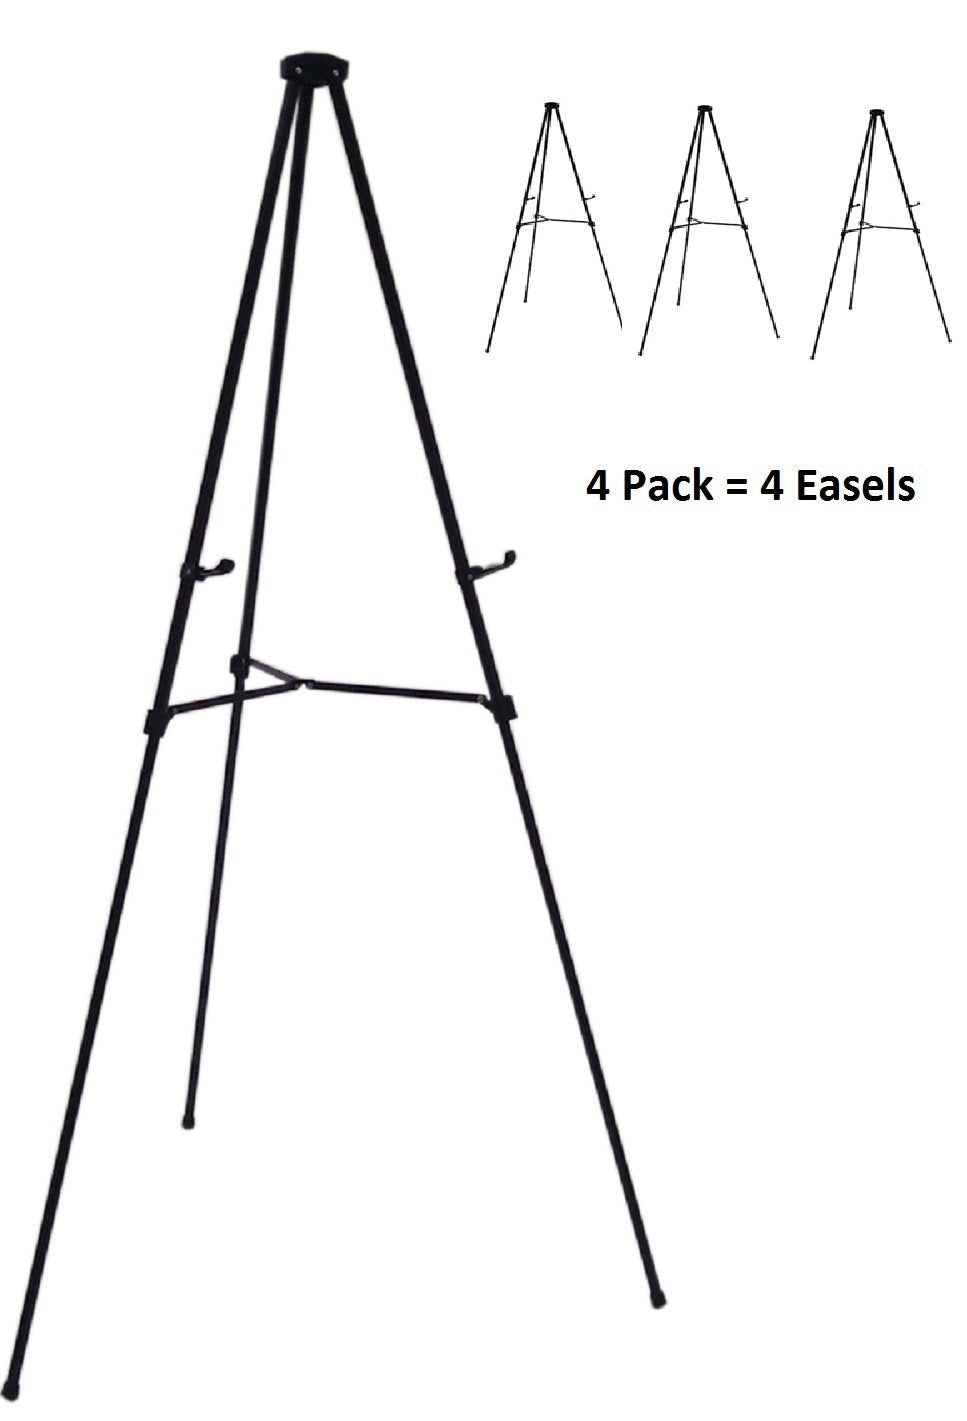 PUJIANG 63 Telescoping Easel,Aluminum Easels for Signs,Easel